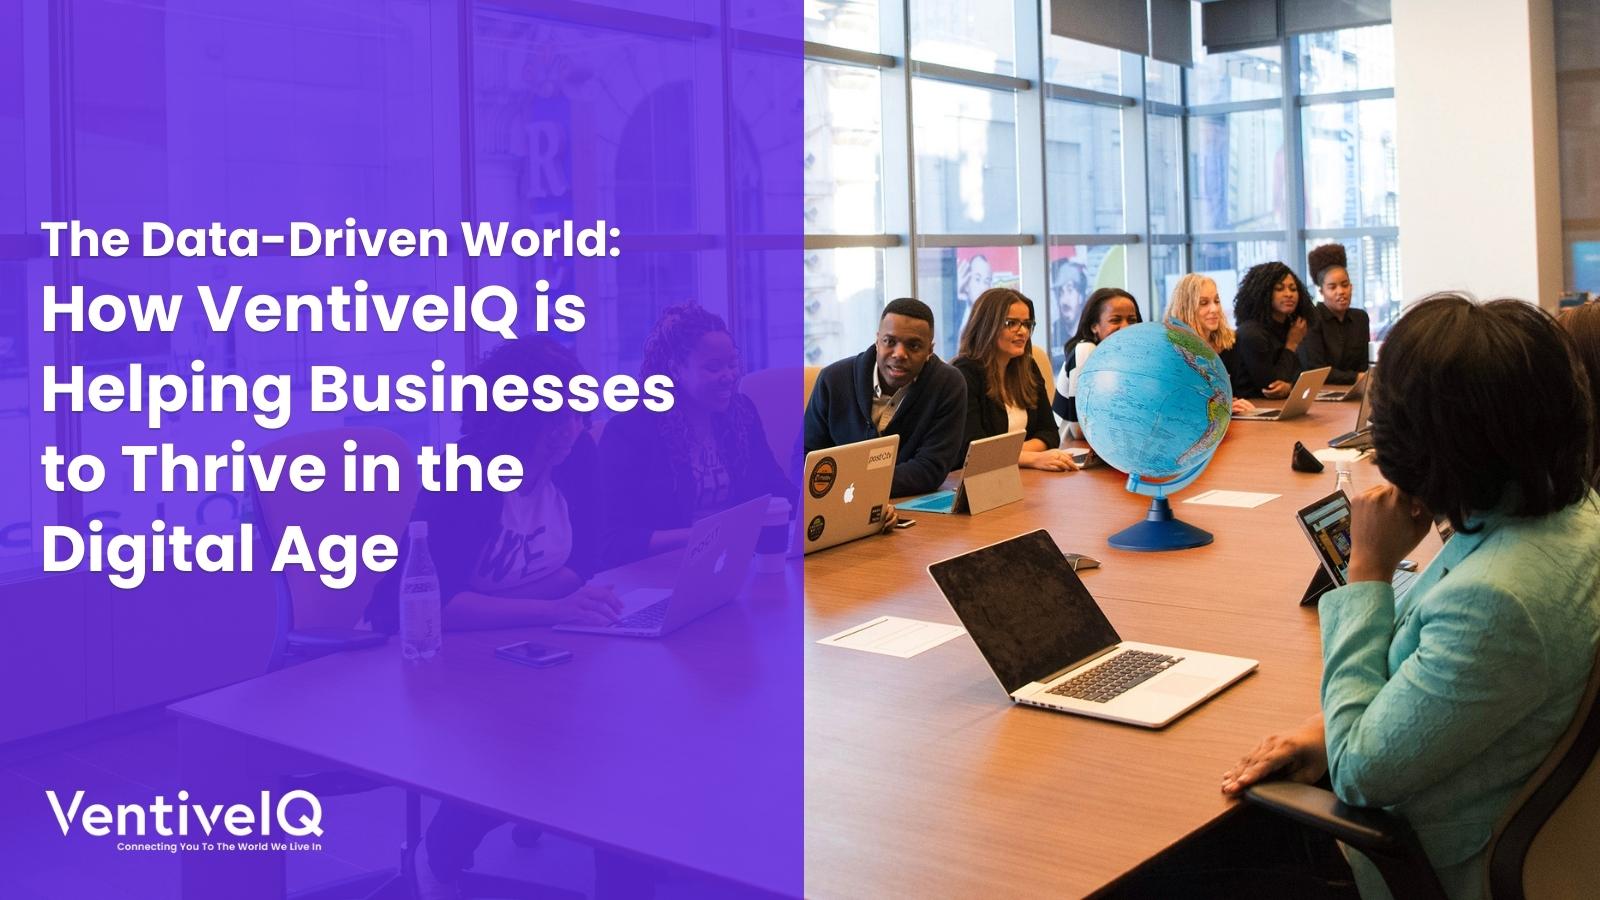 The Data-Driven World: How VentiveIQ is Helping Businesses to Thrive in the Digital Age